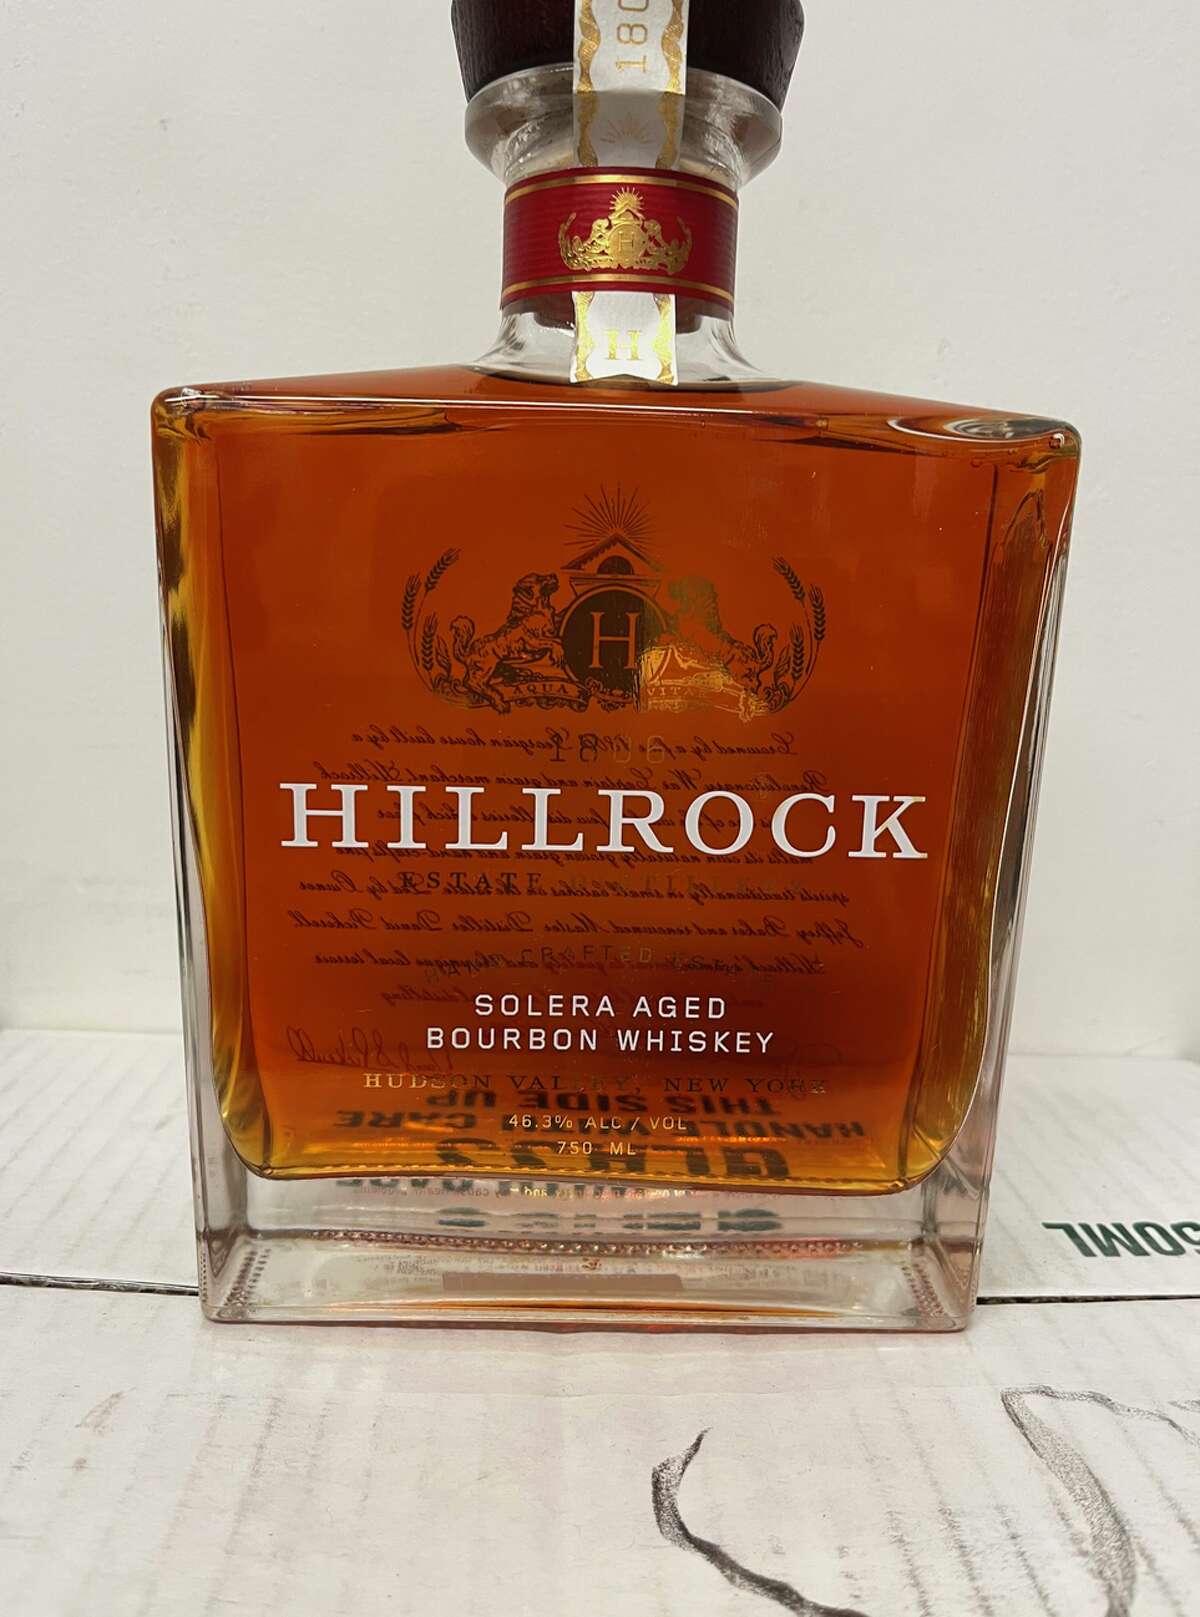 Special-edition bottles of Hillrock Distillery, Hudson Valley, Solera-Aged Bourbon from Harbor Point Wines and Spirits that have been signed by master-distiller Dave Pickerell.